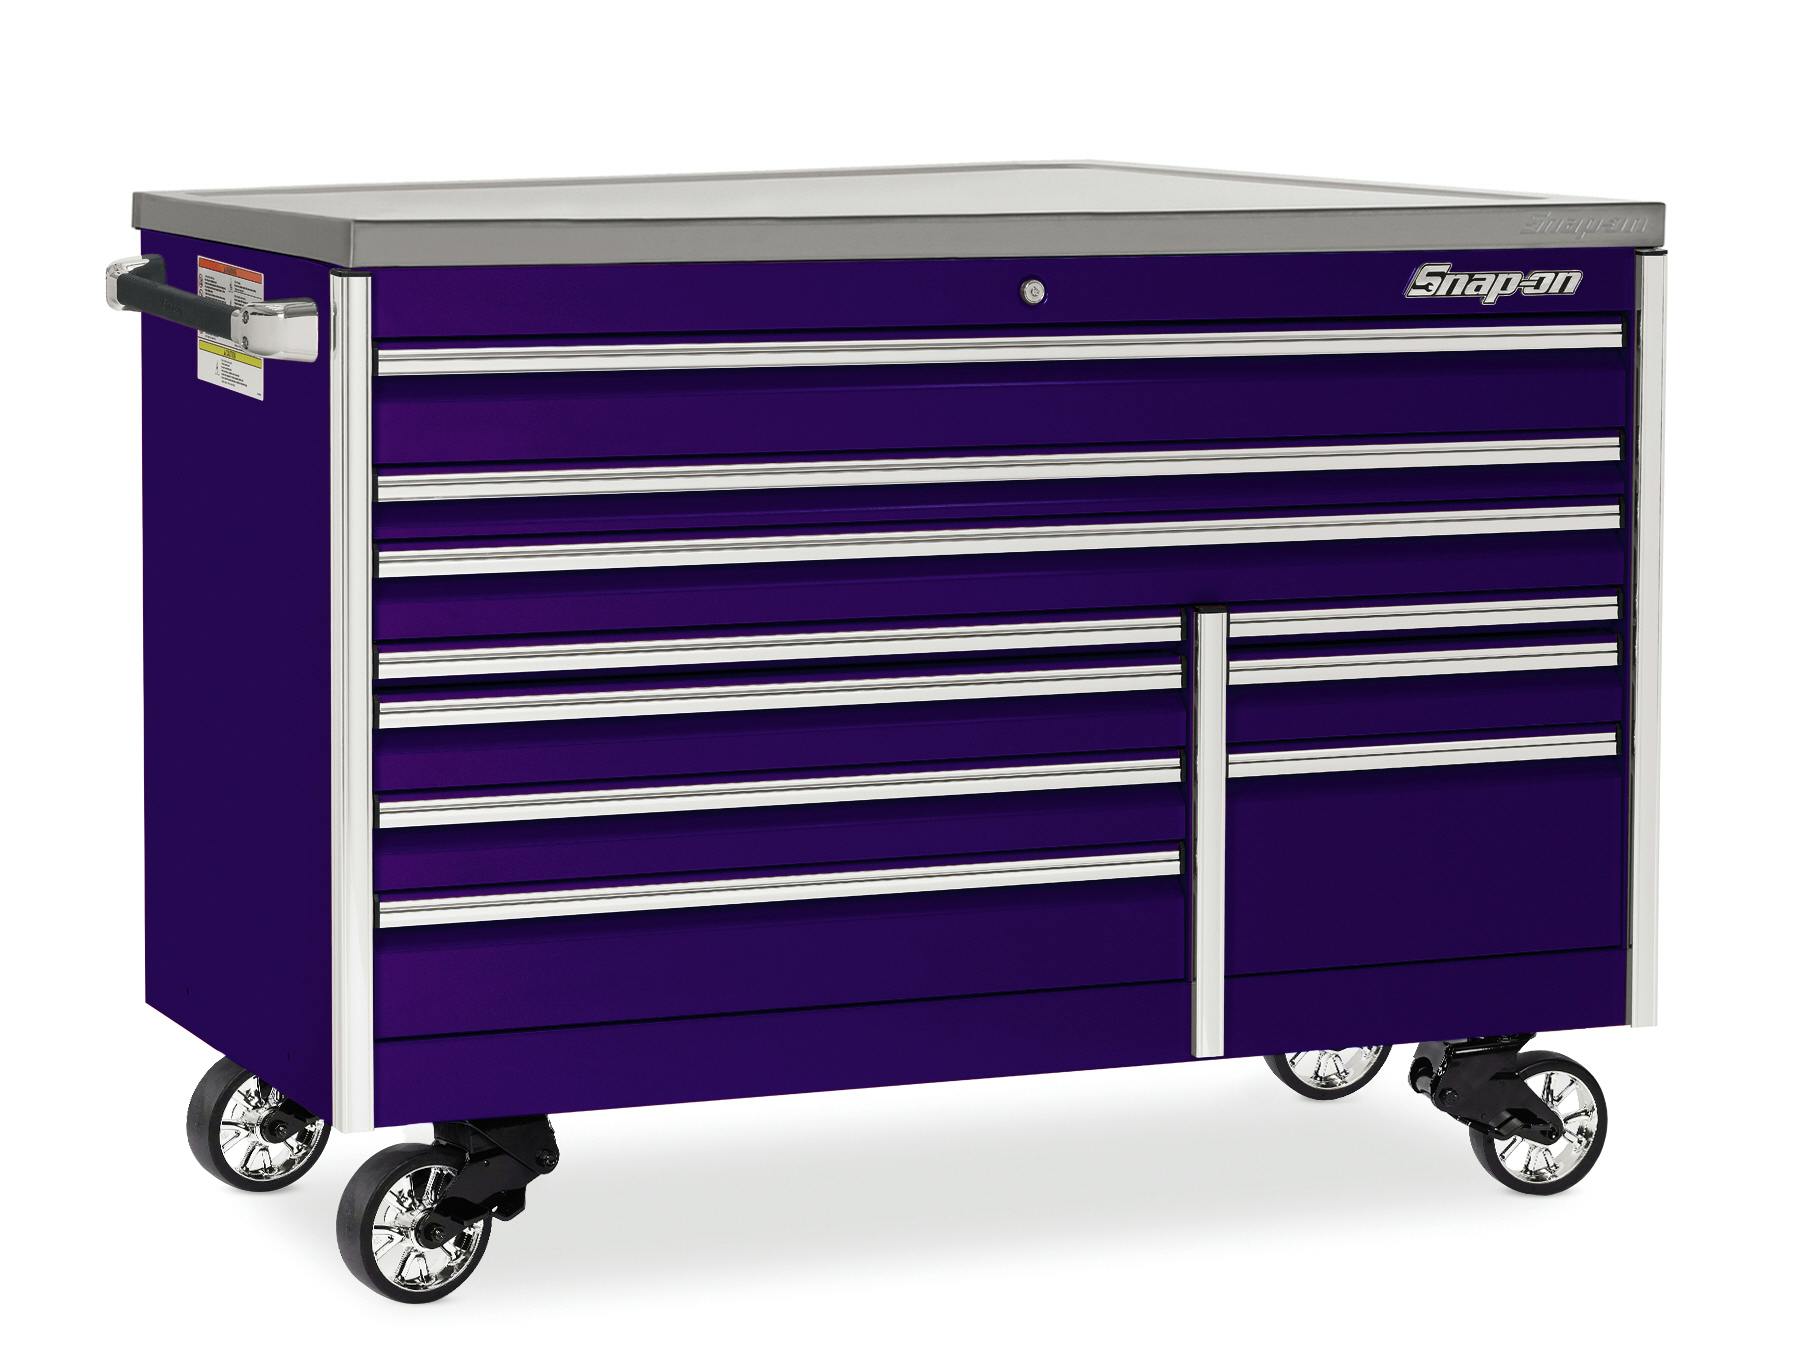 Snap On Tool Box 68” Artic Silver With Purple Trim for Sale in